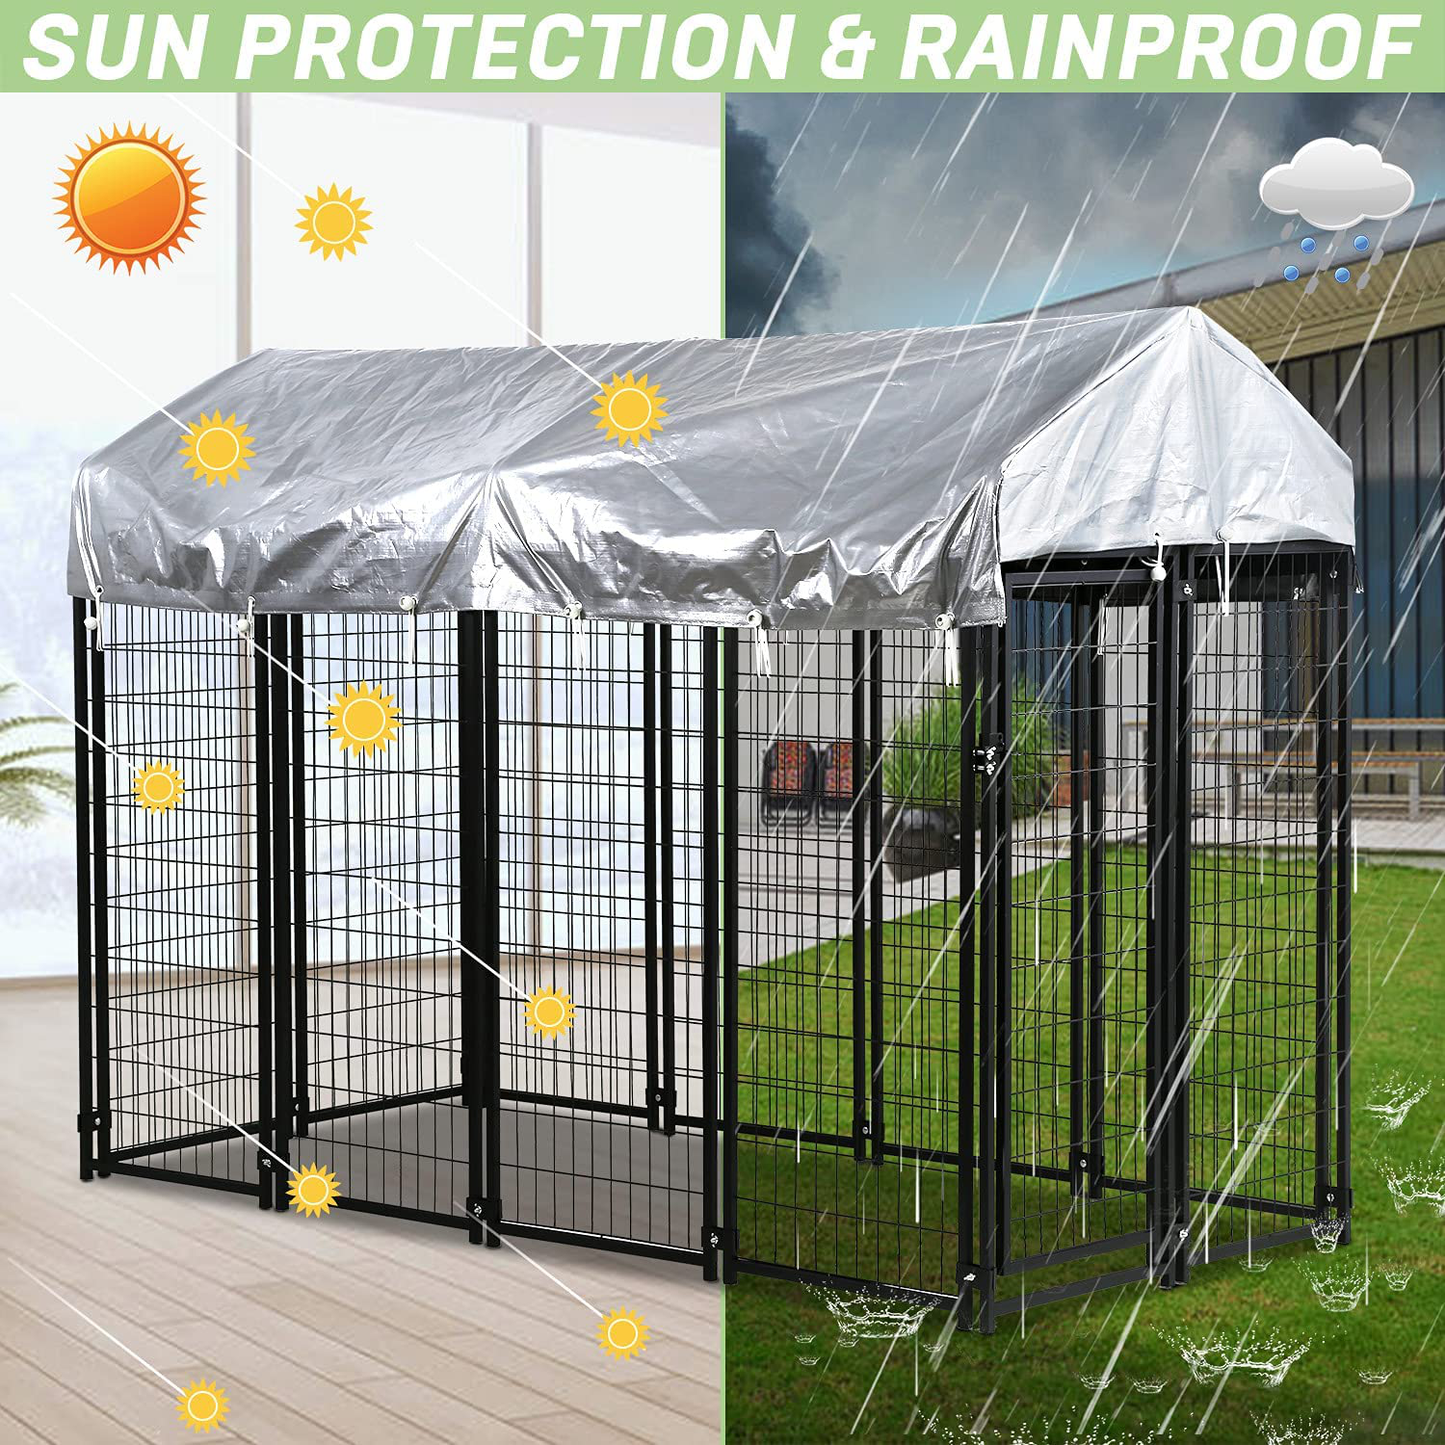 Heavy Duty Dog Crate Cage Kennel,Large Outdoor Waterproof Dog Yard Kennel Pet Playpen House,8' X 4' X 6' Wire Metal Pet Play Pen Crates Cage Fence W/ UV Protection Shade Cover & Roof & Secure Lock